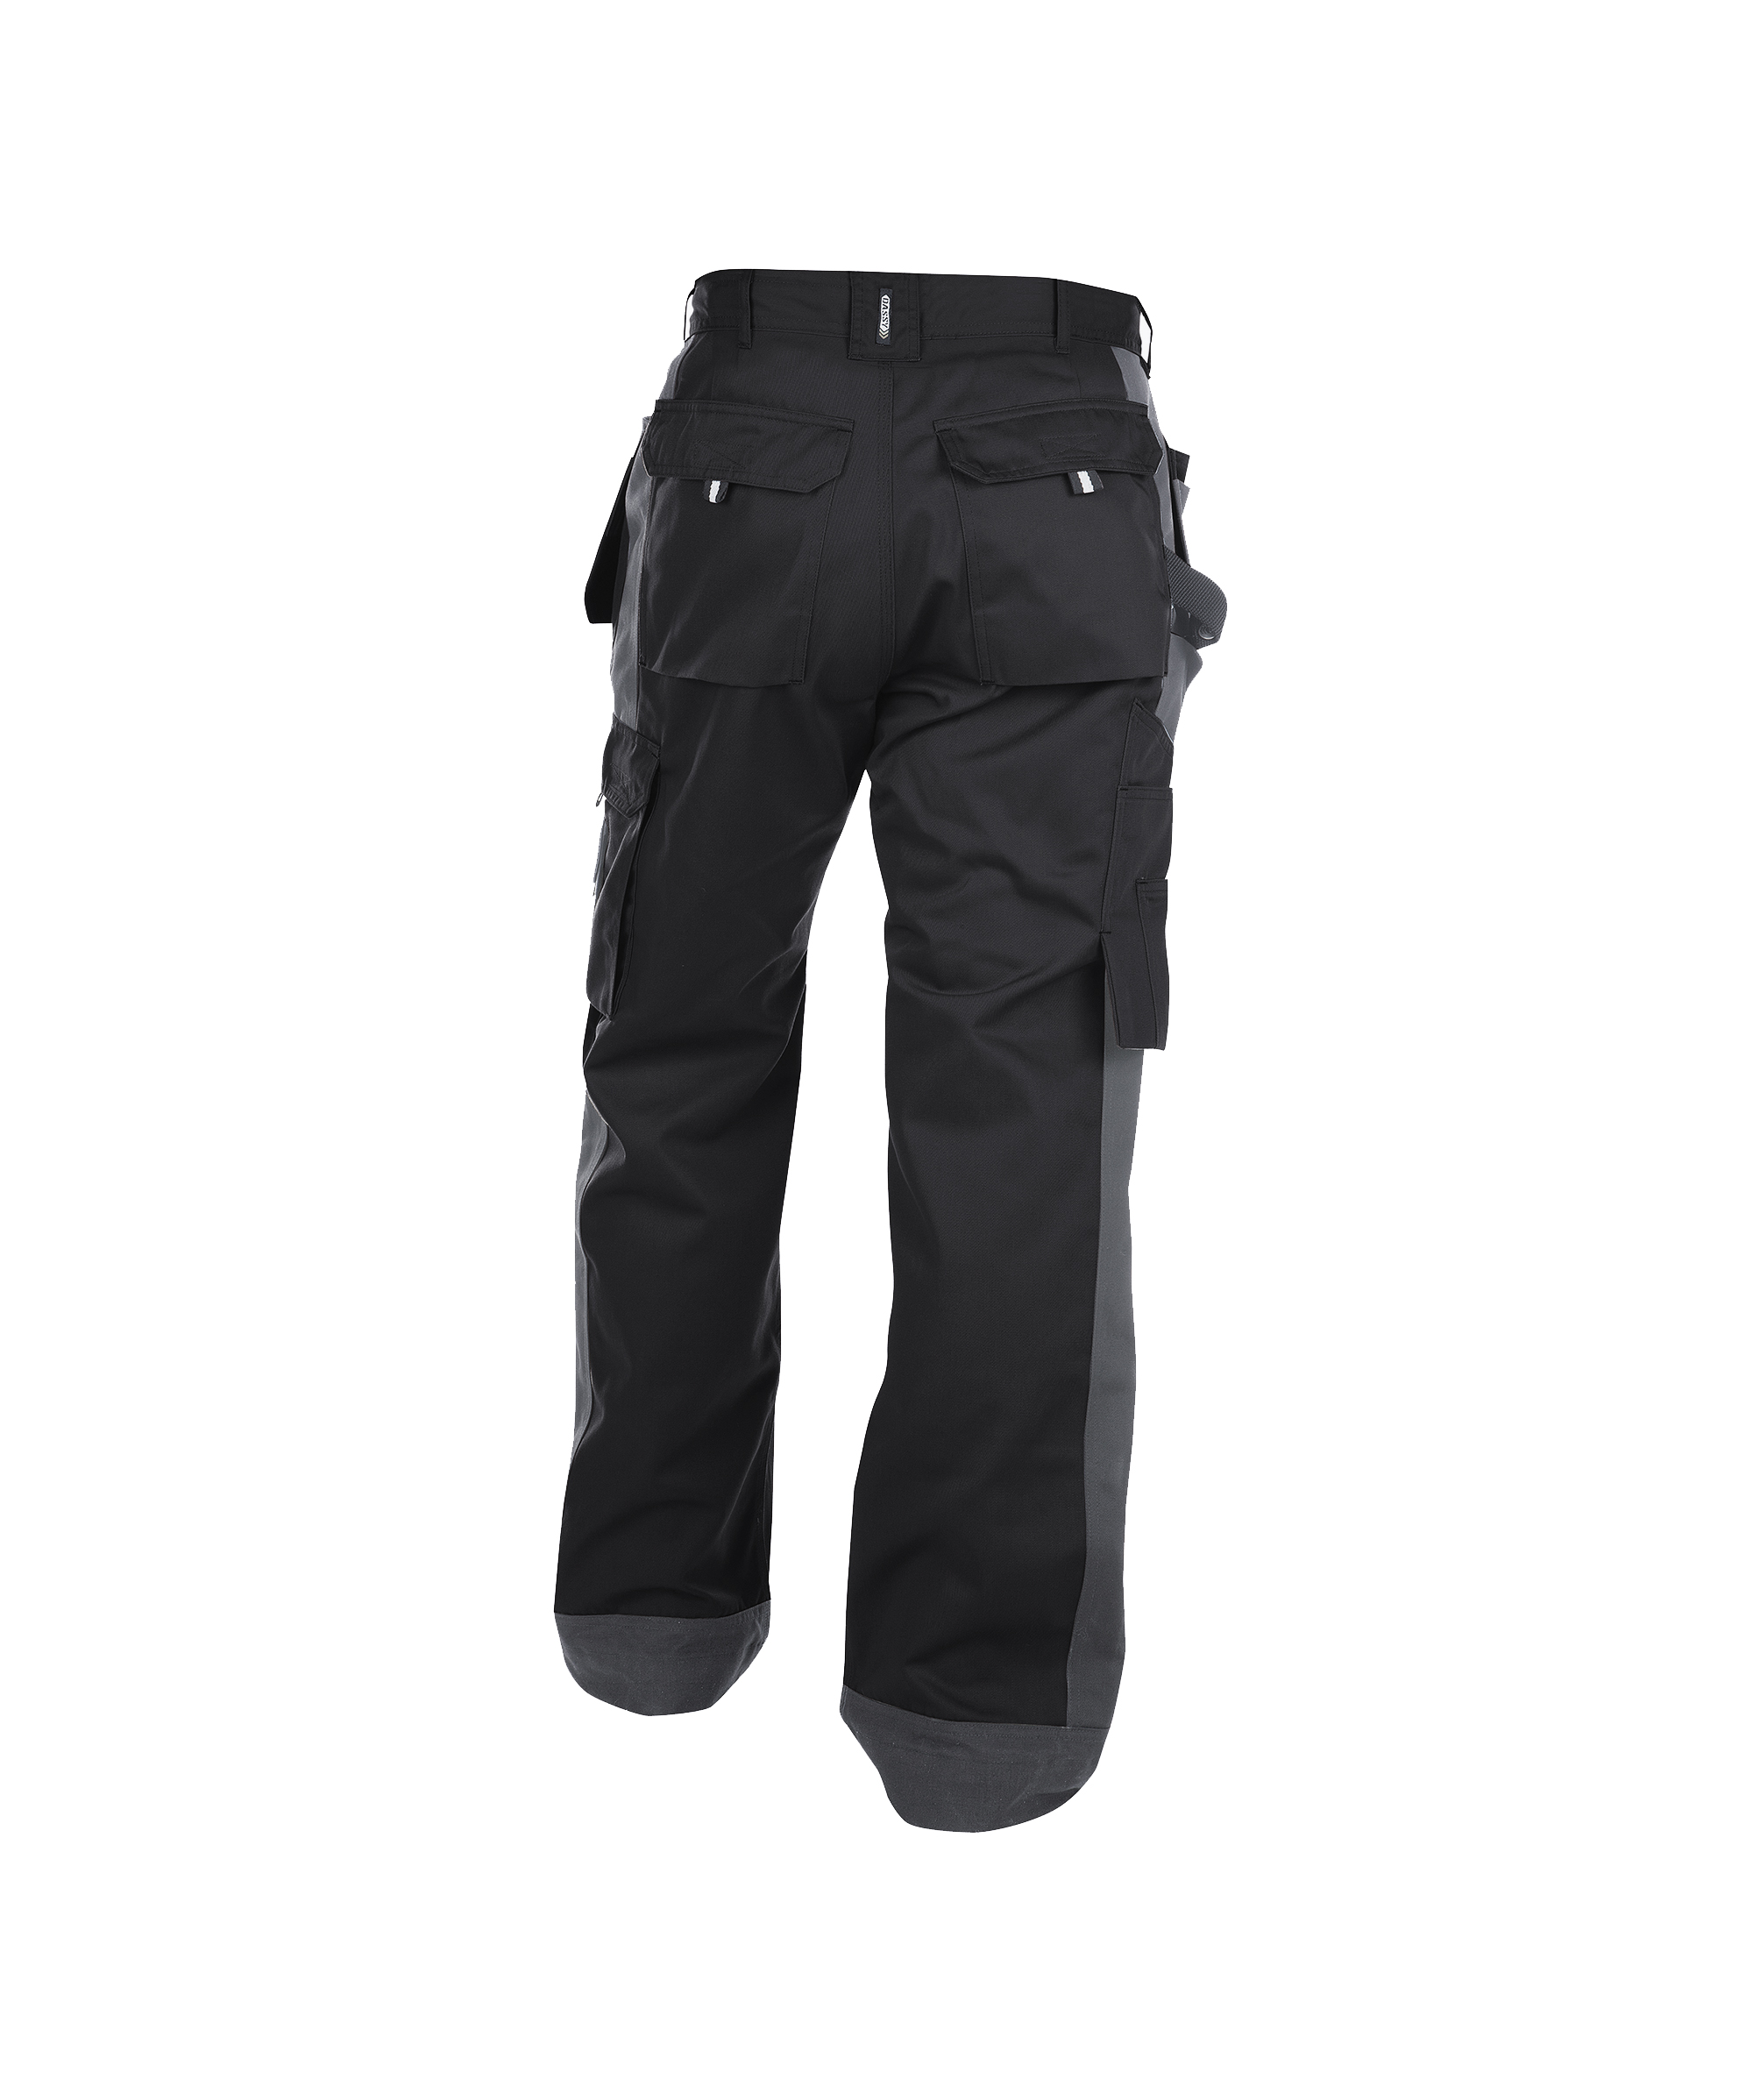 seattle_two-tone-work-trousers-with-multi-pockets-and-knee-pockets_black-cement-grey_back.jpg